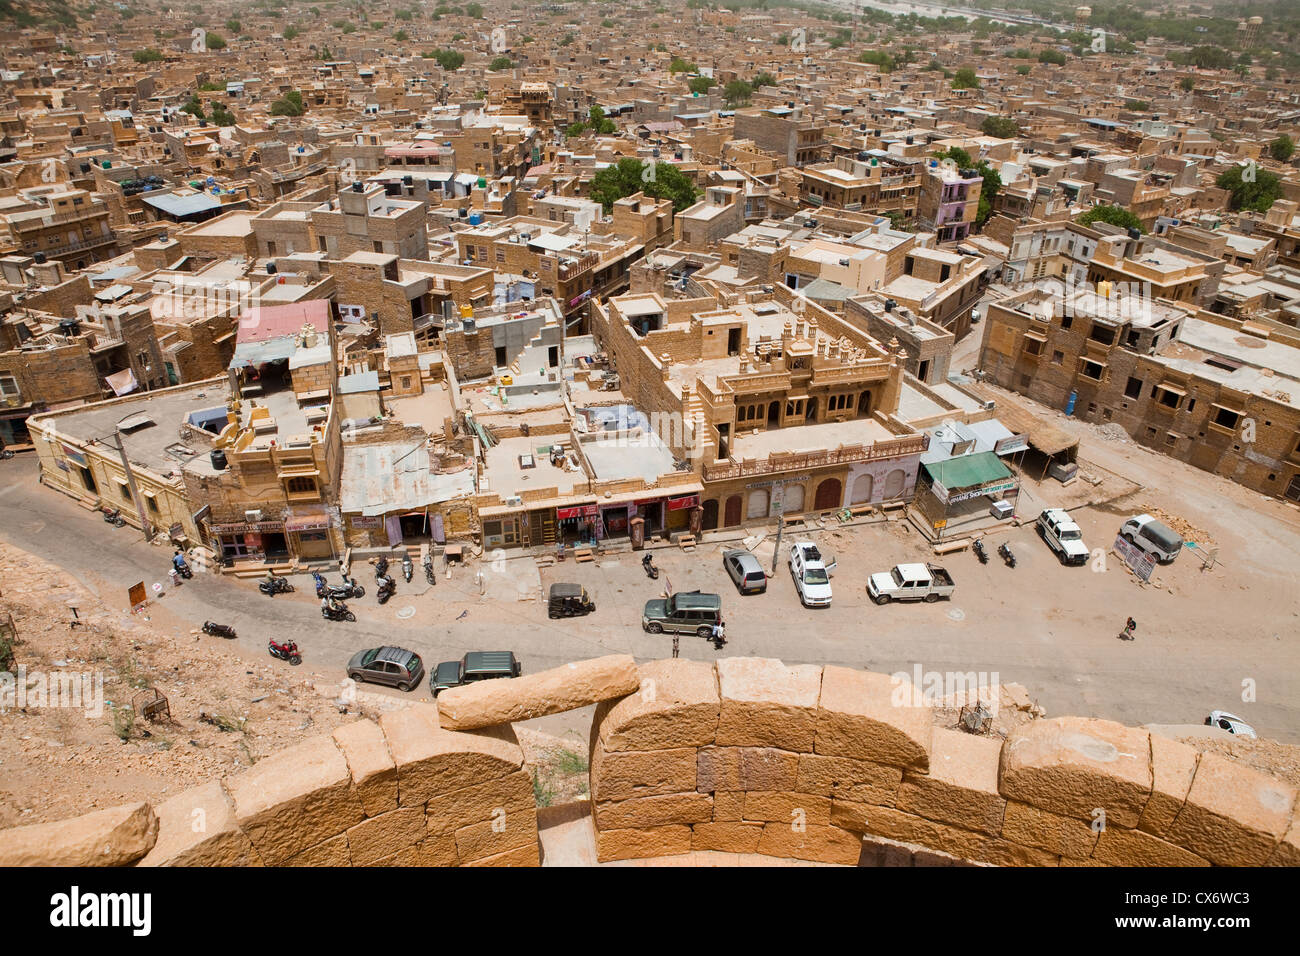 View from the top of Jaisalmer Fort of the city below Stock Photo